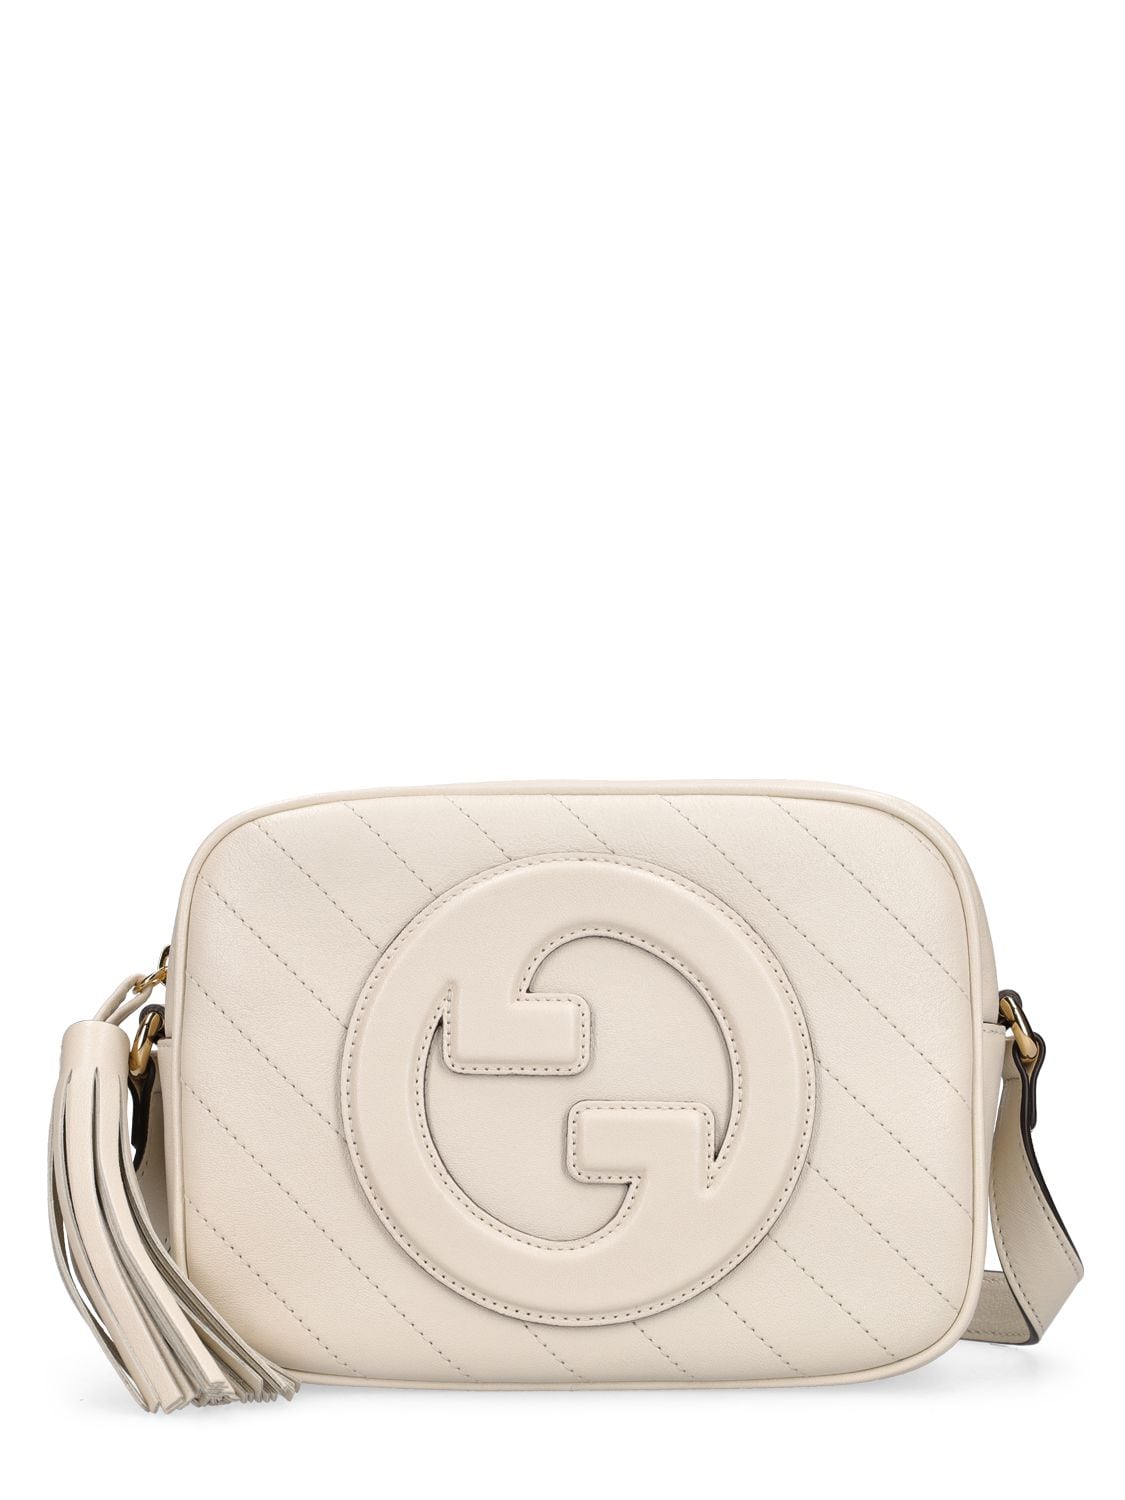 Gucci Blondie Small Shoulder Bag White in Leather with Gold-tone - US